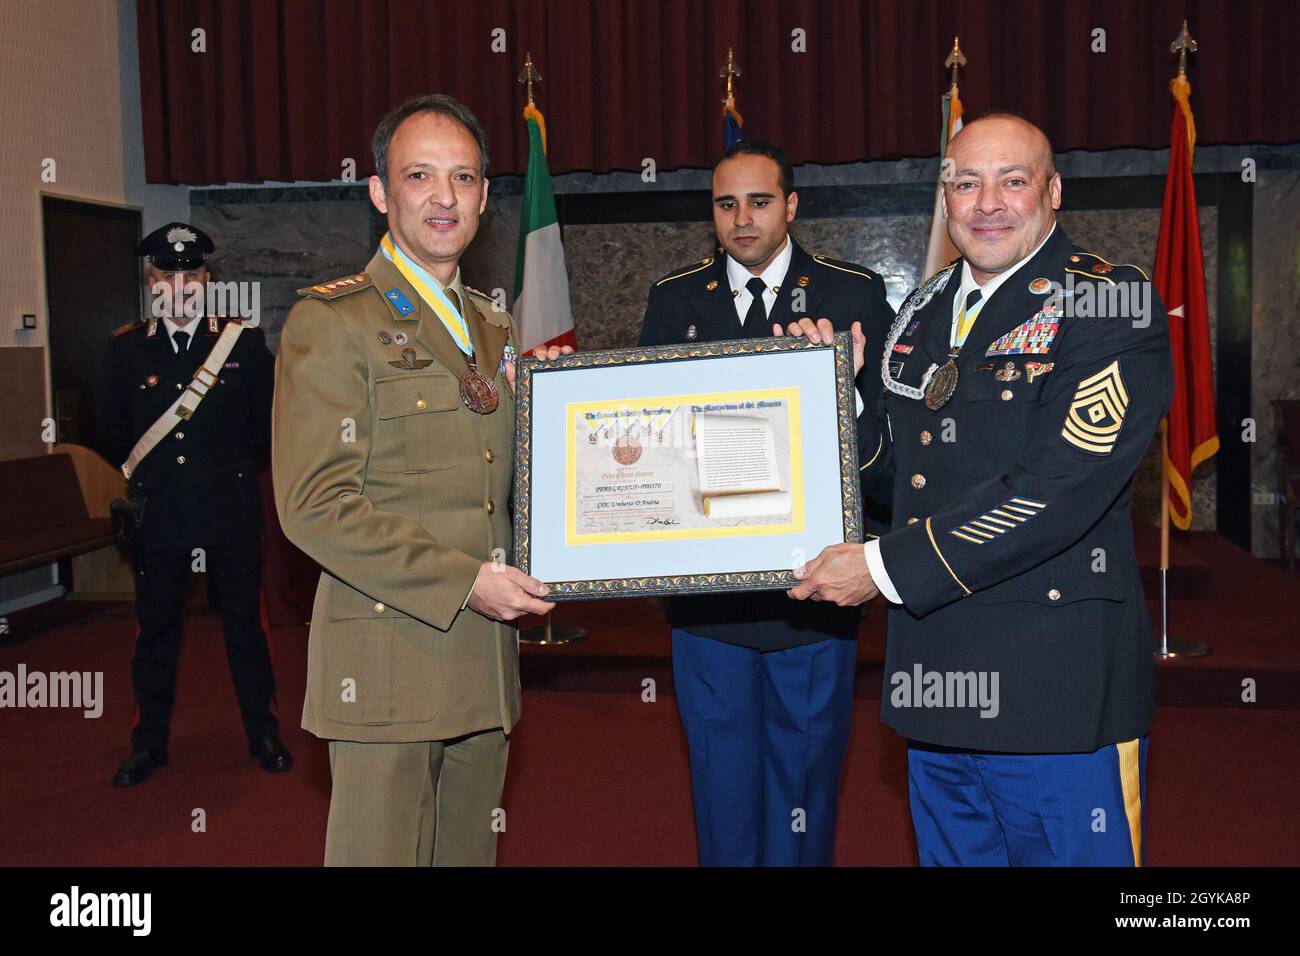 U.S. Army Soldier Master Sgt. Melvyn Lopez, right, presents the National Infantry Association “The Martyrdom of Saint Maurice” Medal to the outgoing Deputy Chief of Staff of United States Army Africa and Senior Italian Officer Colonel Umberto D’Andria, during the Designation of Responsibility Ceremony at Caserma C. Ederle in Vicenza, Italy, January 16, 2020. (U.S. Army Photos by Paolo Bovo) Stock Photo